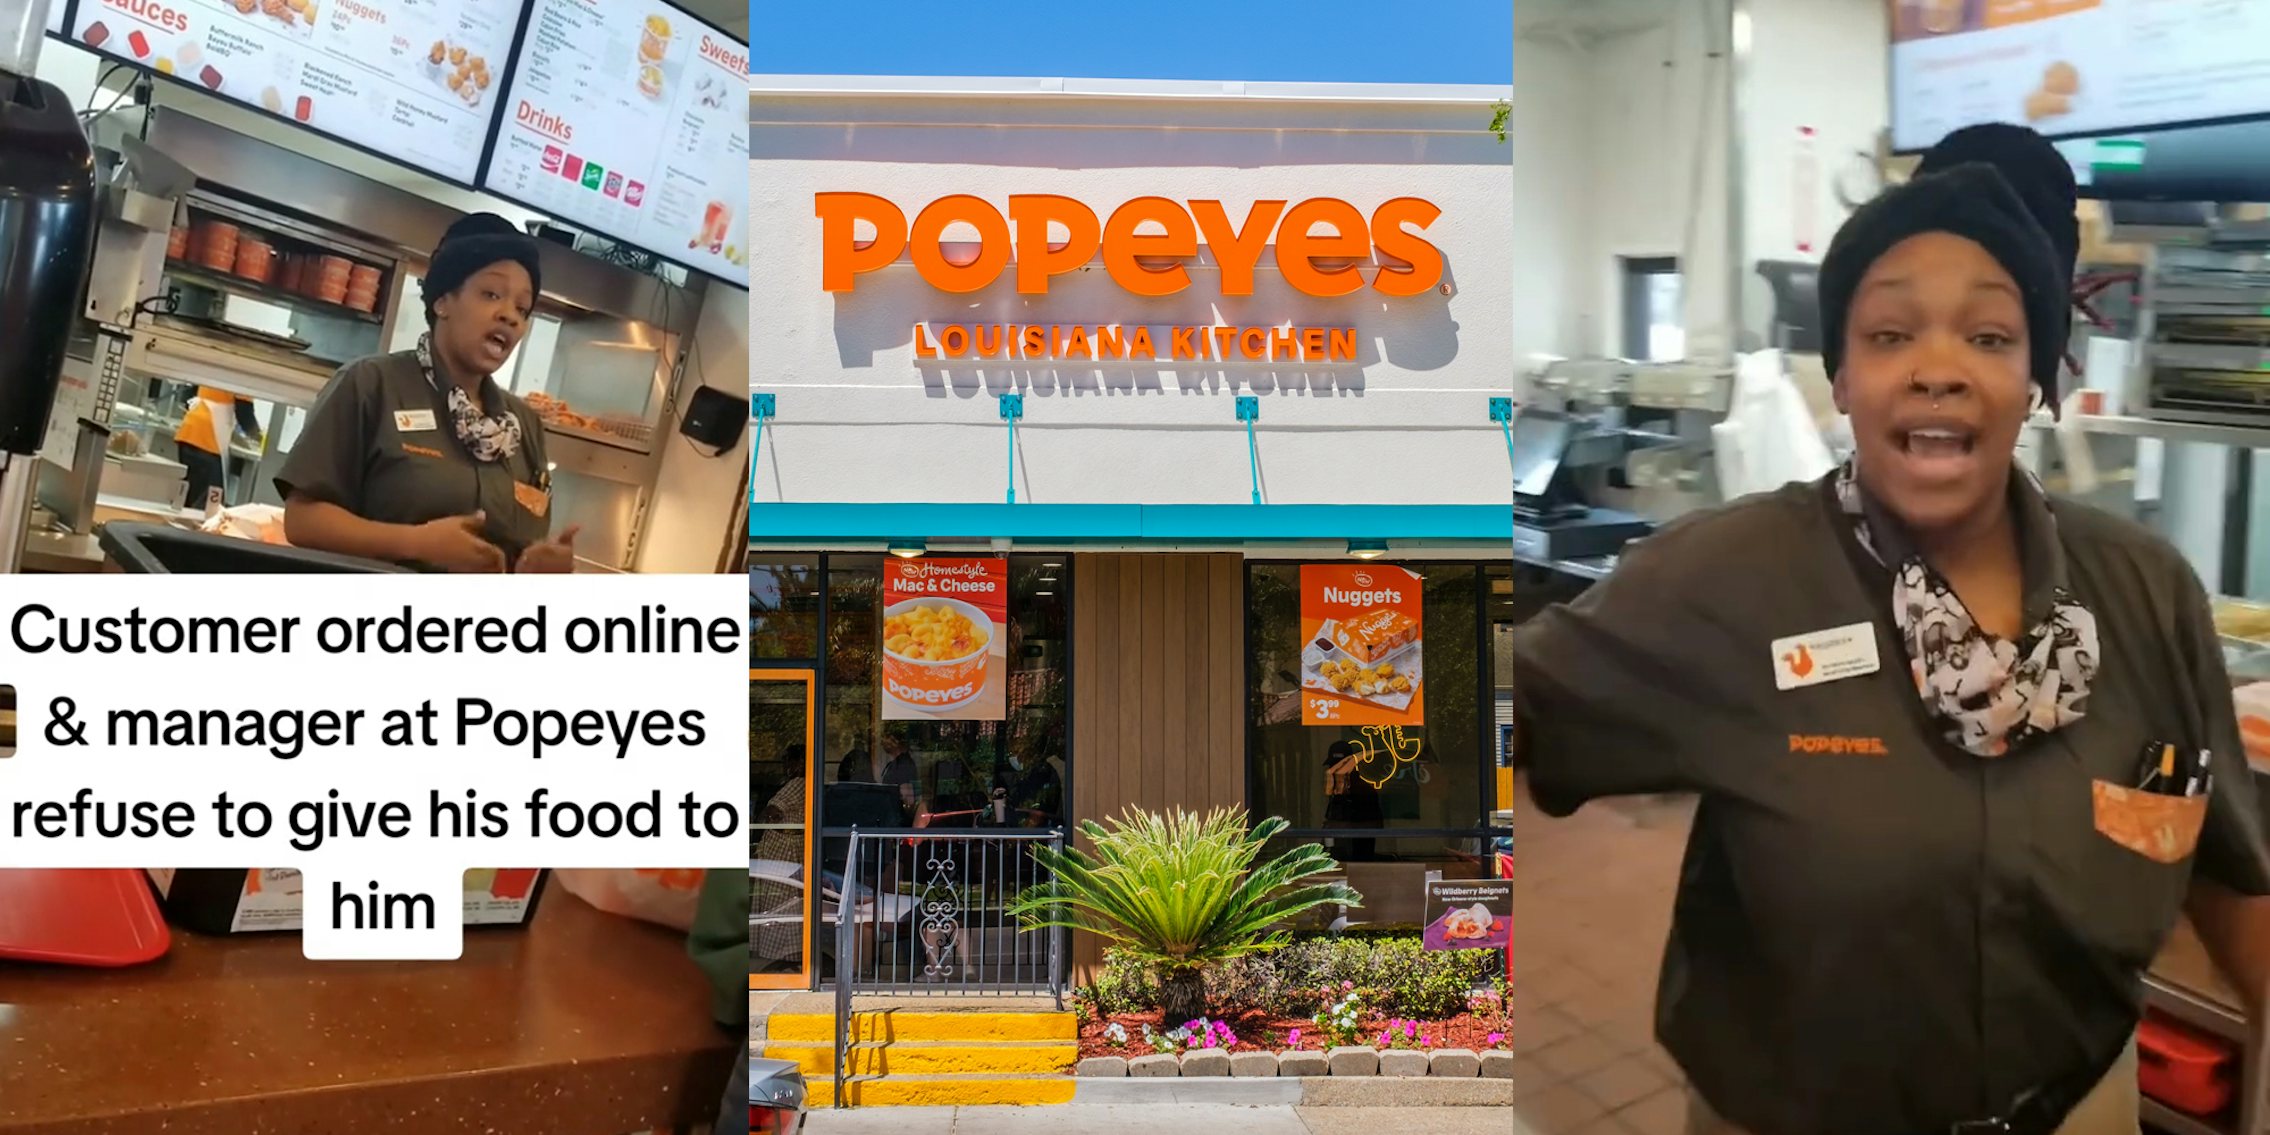 Popeyes interior with manager speaking with caption 'Customer ordered online & manager at Popeyes refuse to give his food to him' (l) Popeyes building with sign (c) Popeyes interior with manager speaking (r)